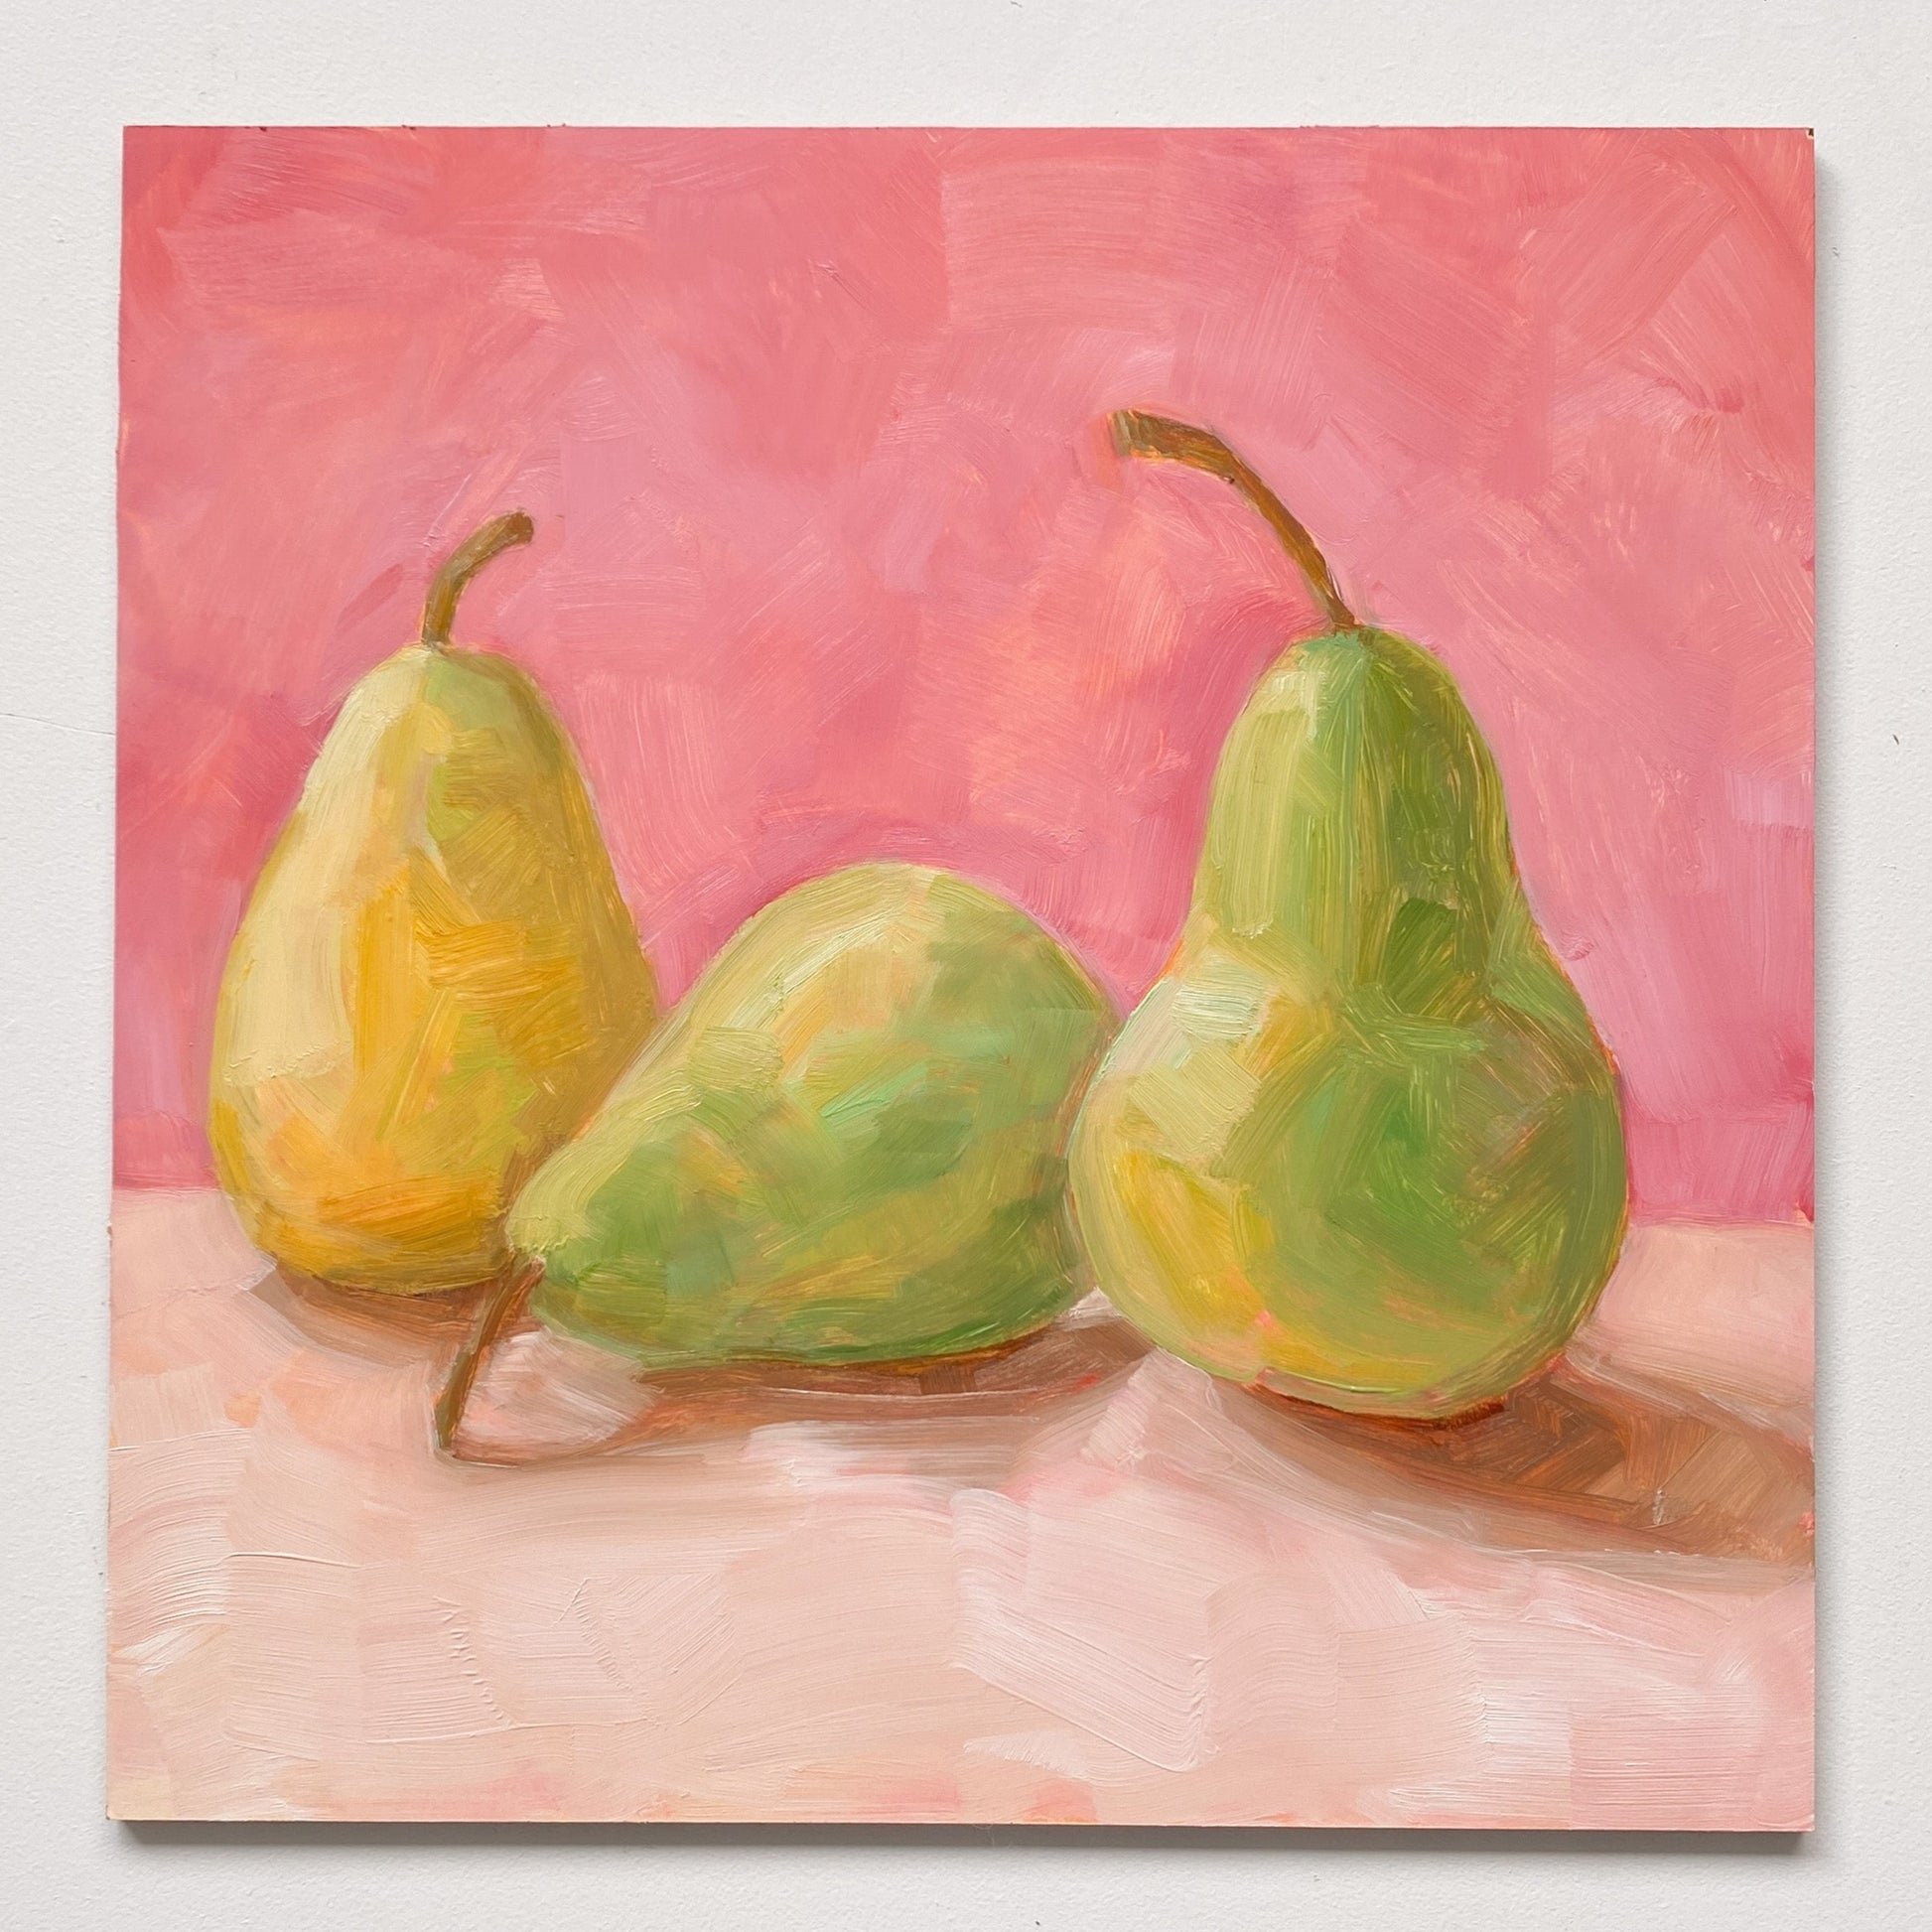 image of an oil painting of two green pears and one yellow pear on a cream surface with a soft and warm pink background